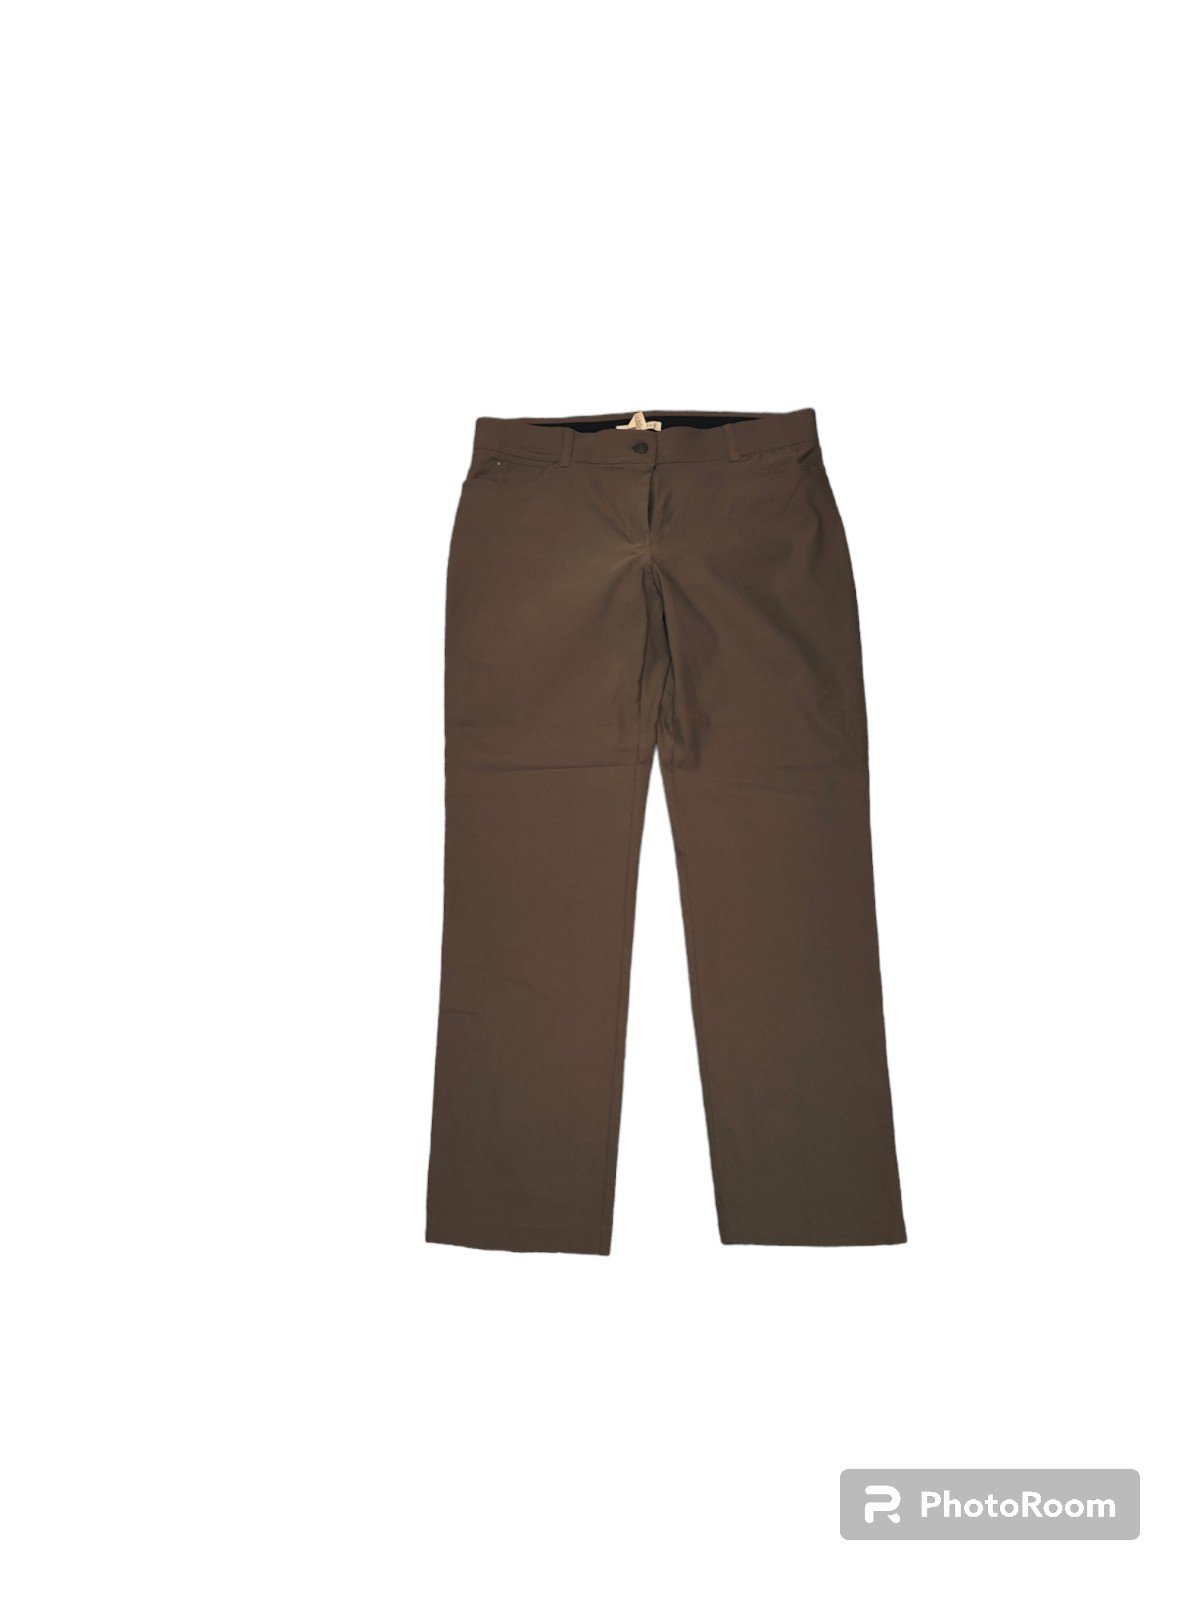 Promotions  Retrology Women´s Stretch Pants md6ceP